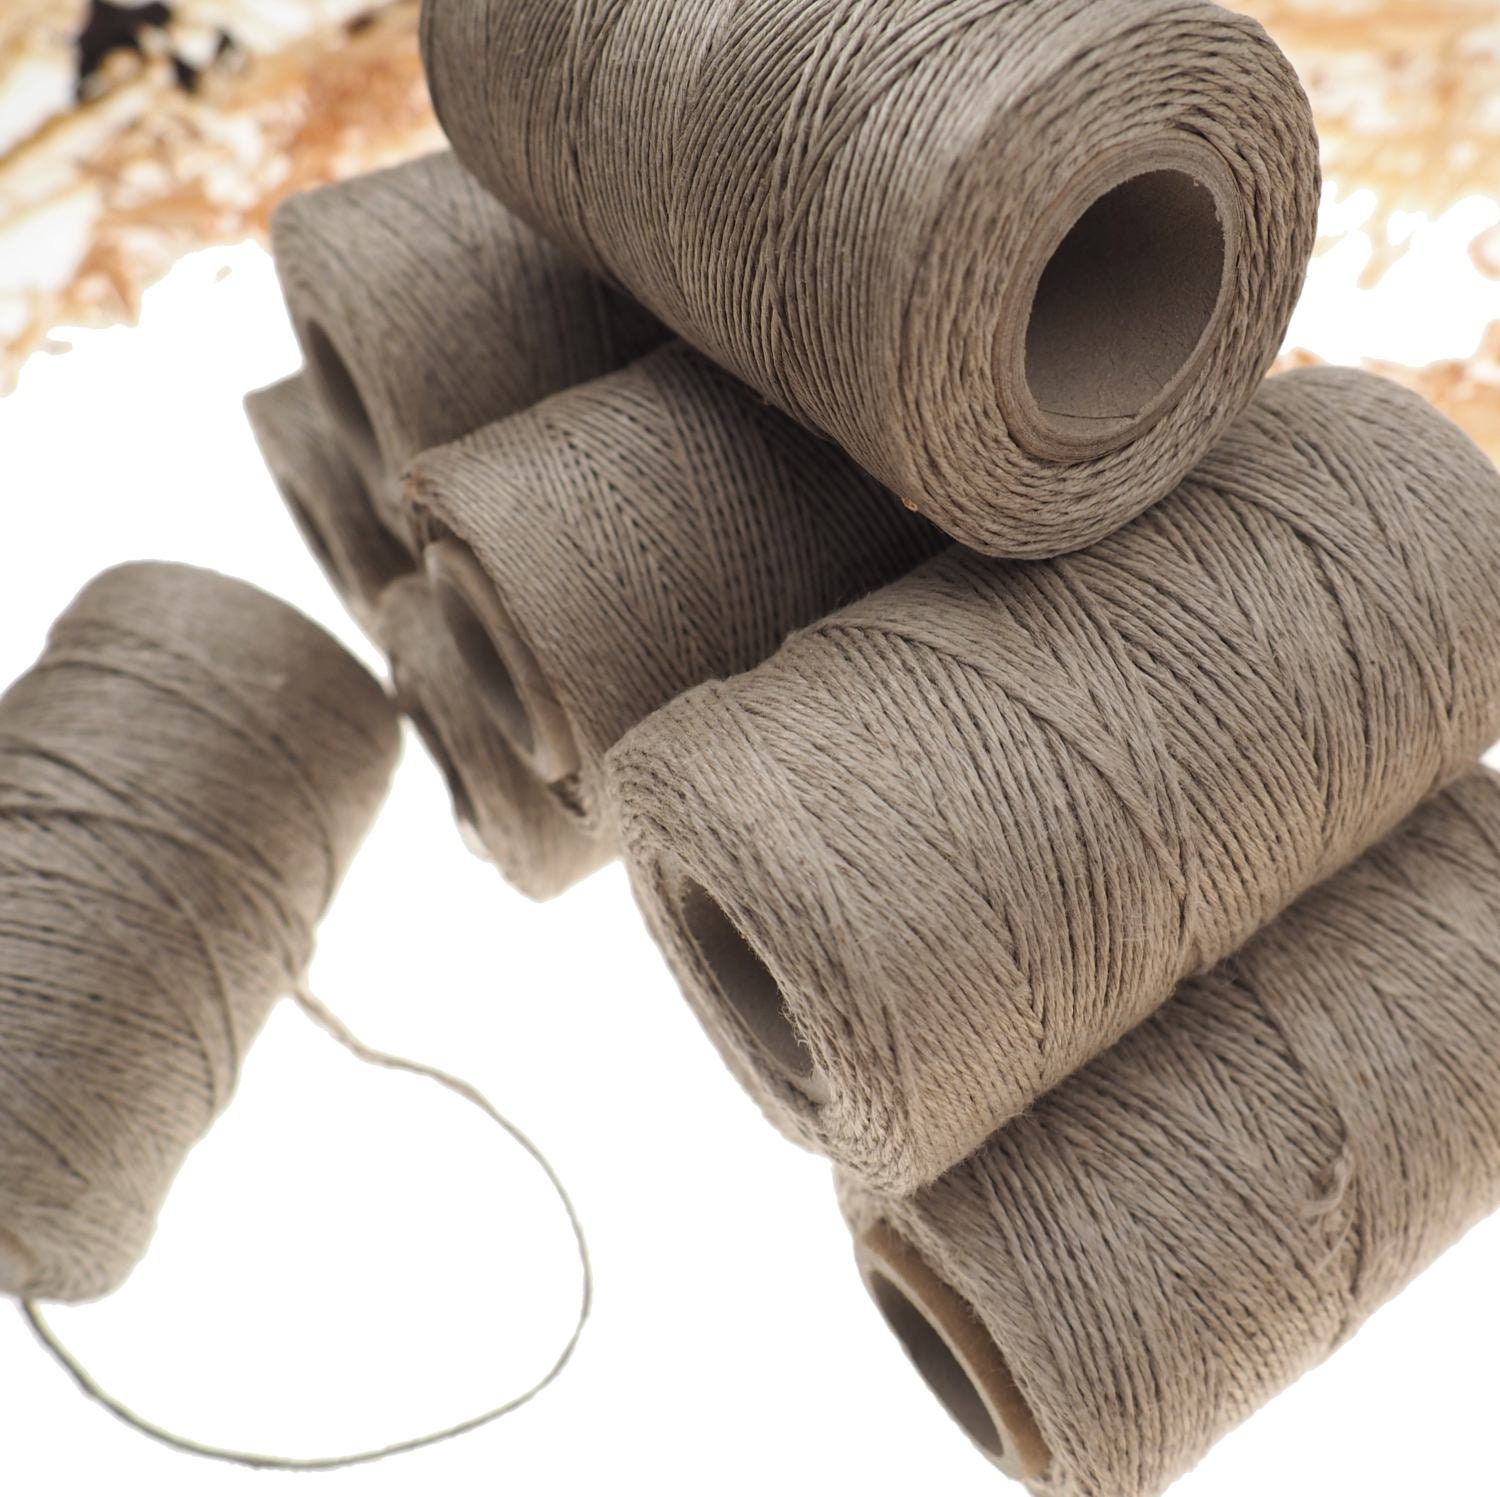 NATURAL Linen Thread, Unwaxed Grey Linen String , Warp Thread Thickness of  1mm / 3ply 100grams 210 Yards 190 Metres, Linen Sewing Thread 